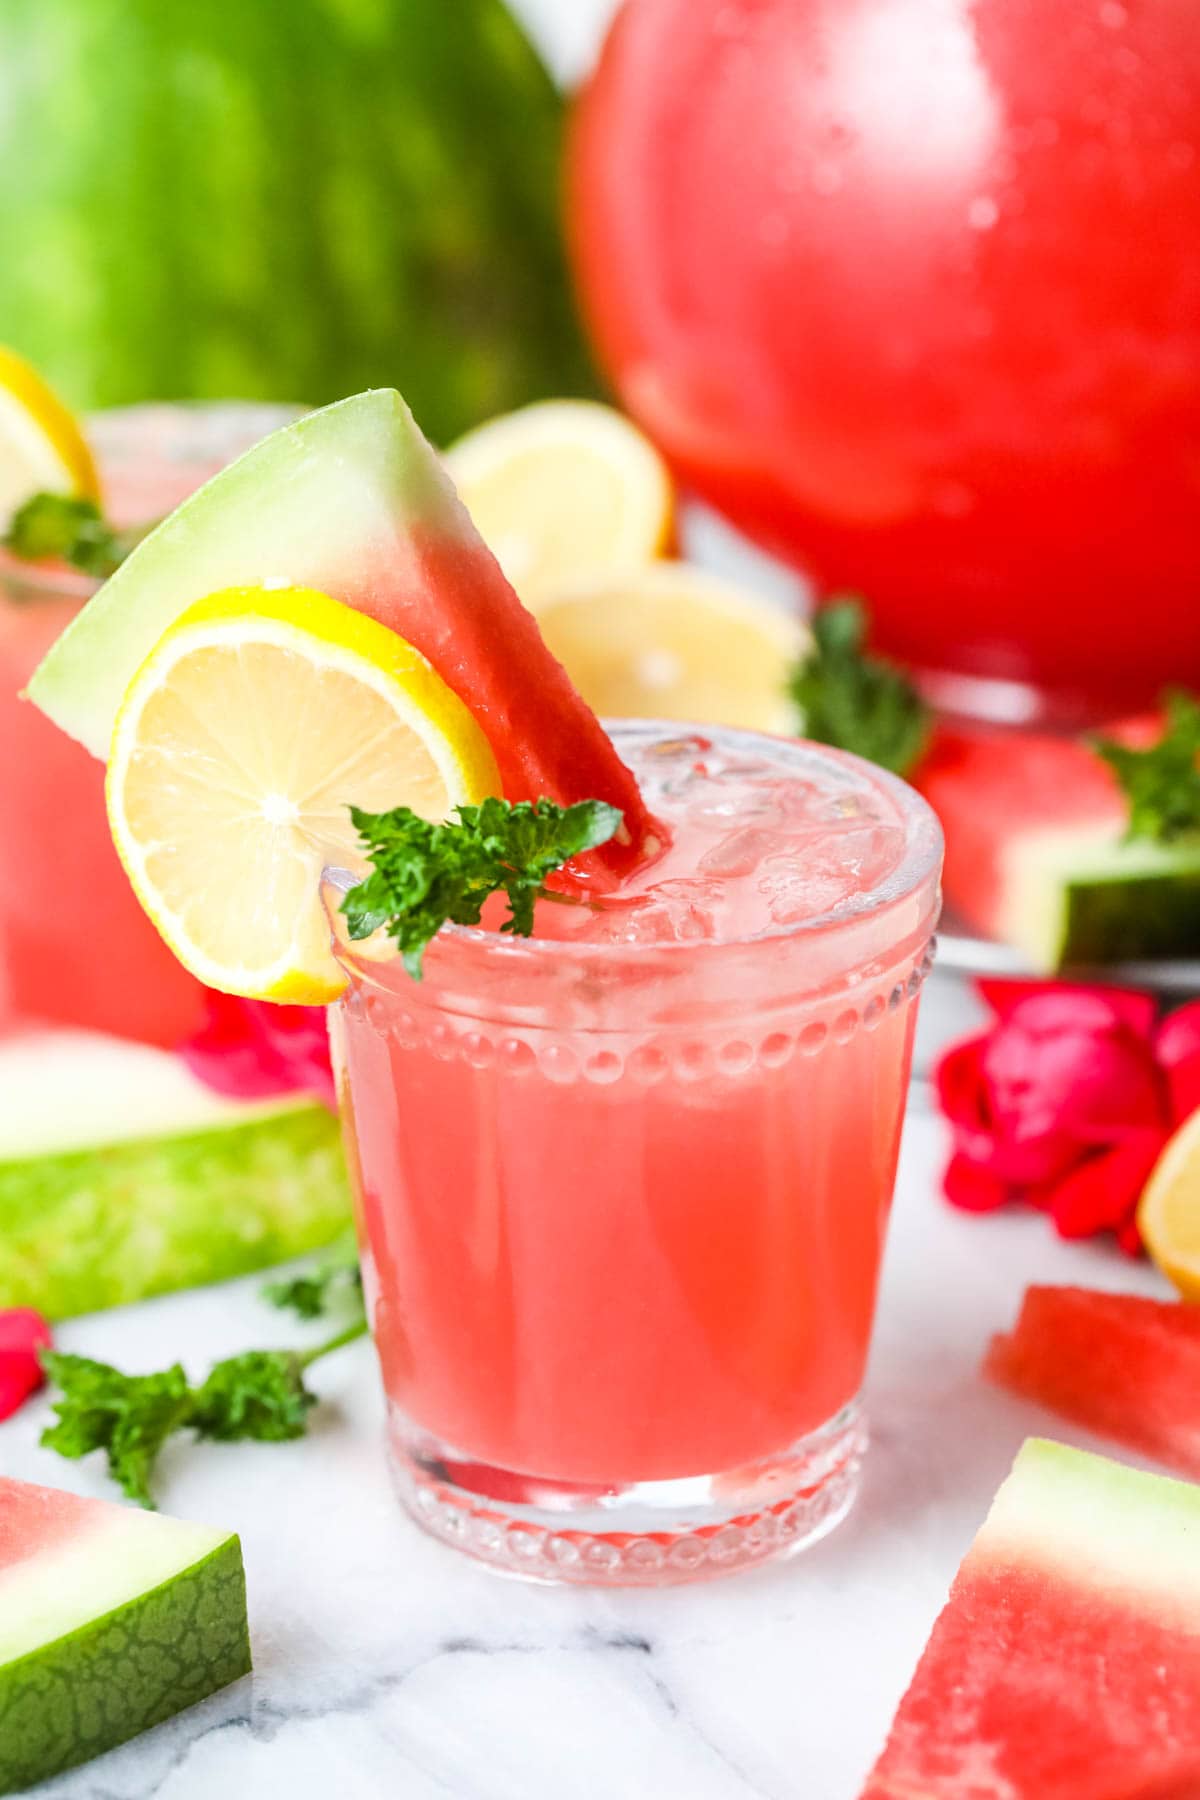 Glass of watermelon lemonade garnished with mint leaves, watermelon slices, and lemon slices.